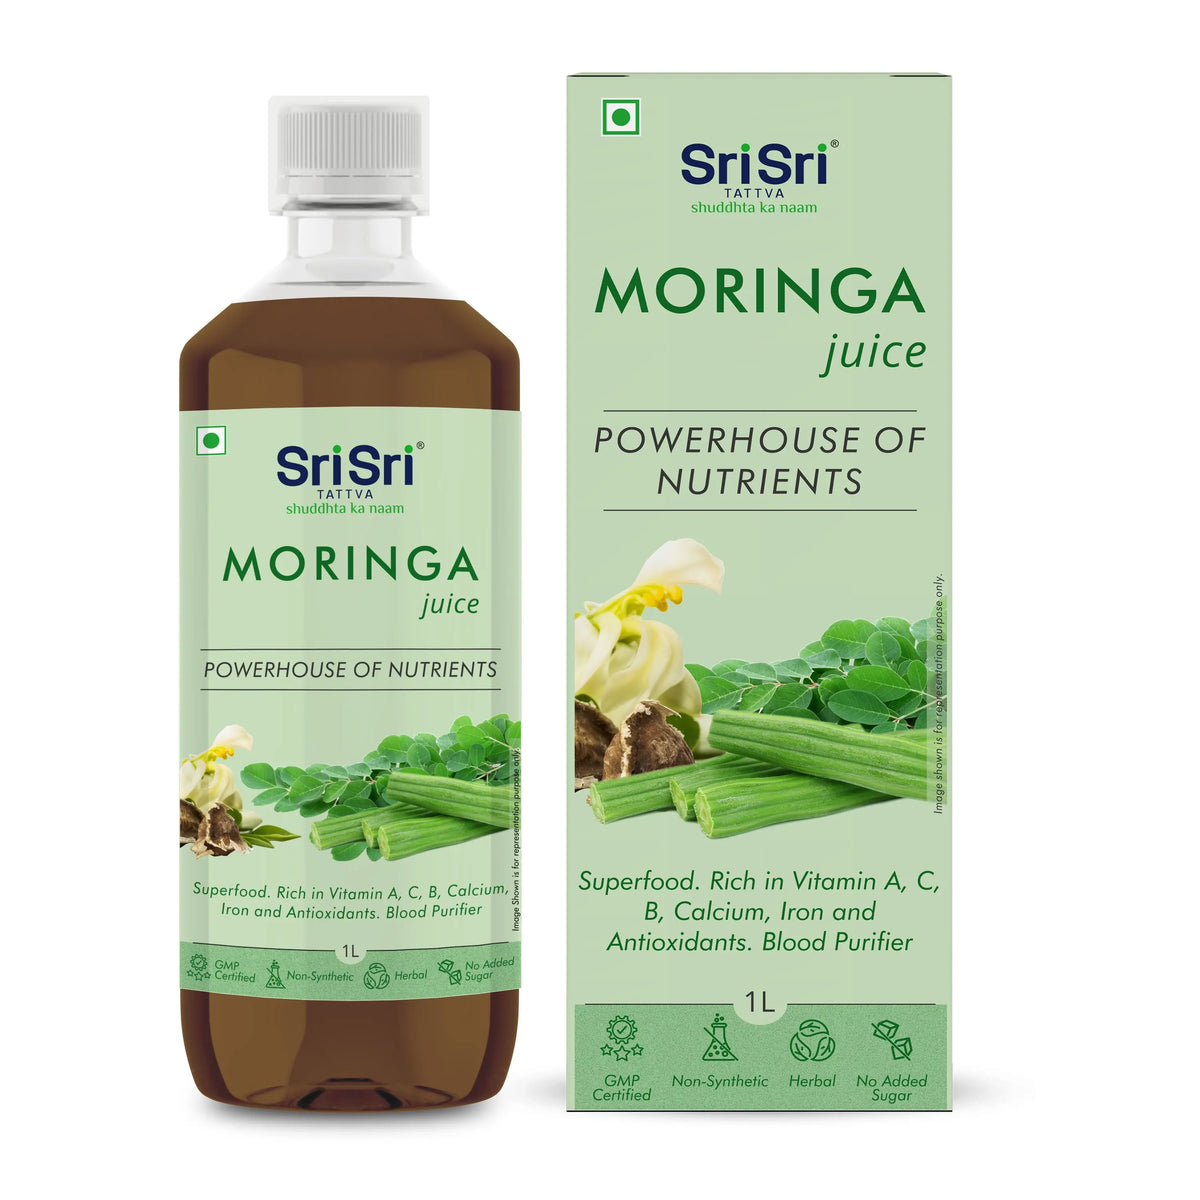 Powerhouse　Rich　Superfood,　In　Of　Nutrients　Moringa　A　Juice　Vitamin